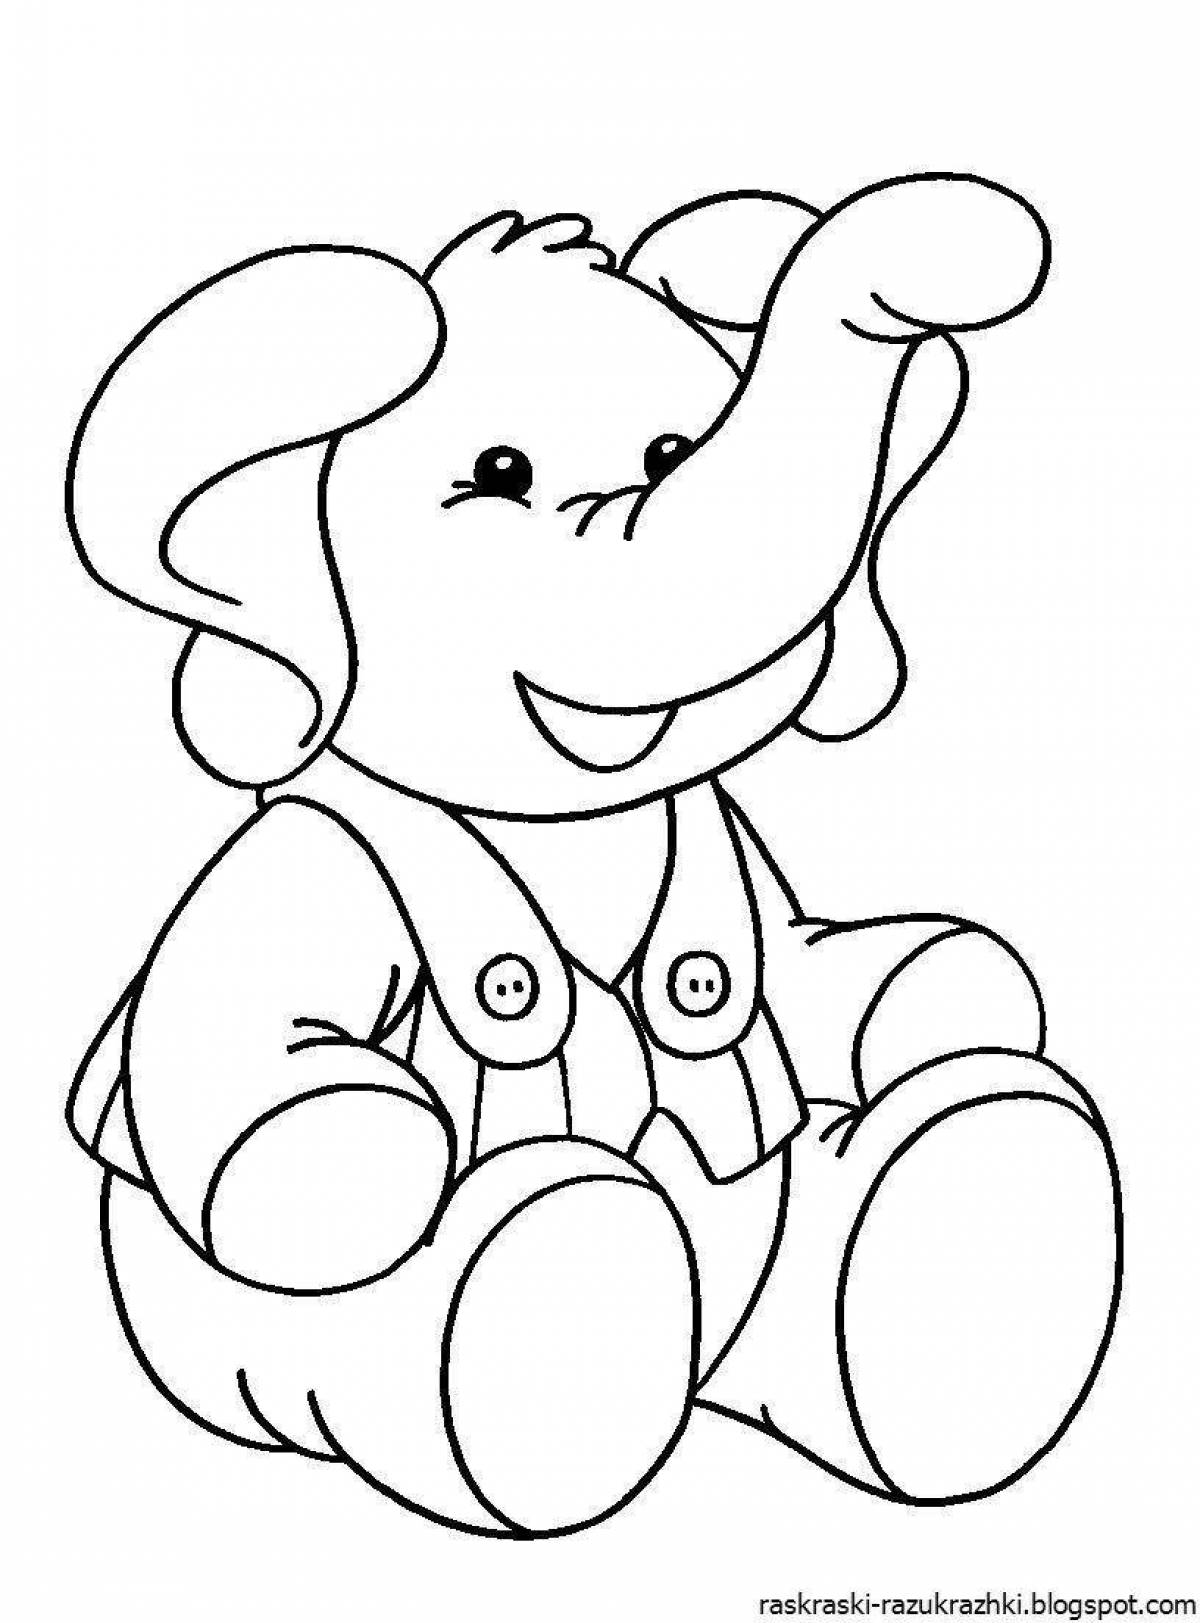 Adorable coloring pictures